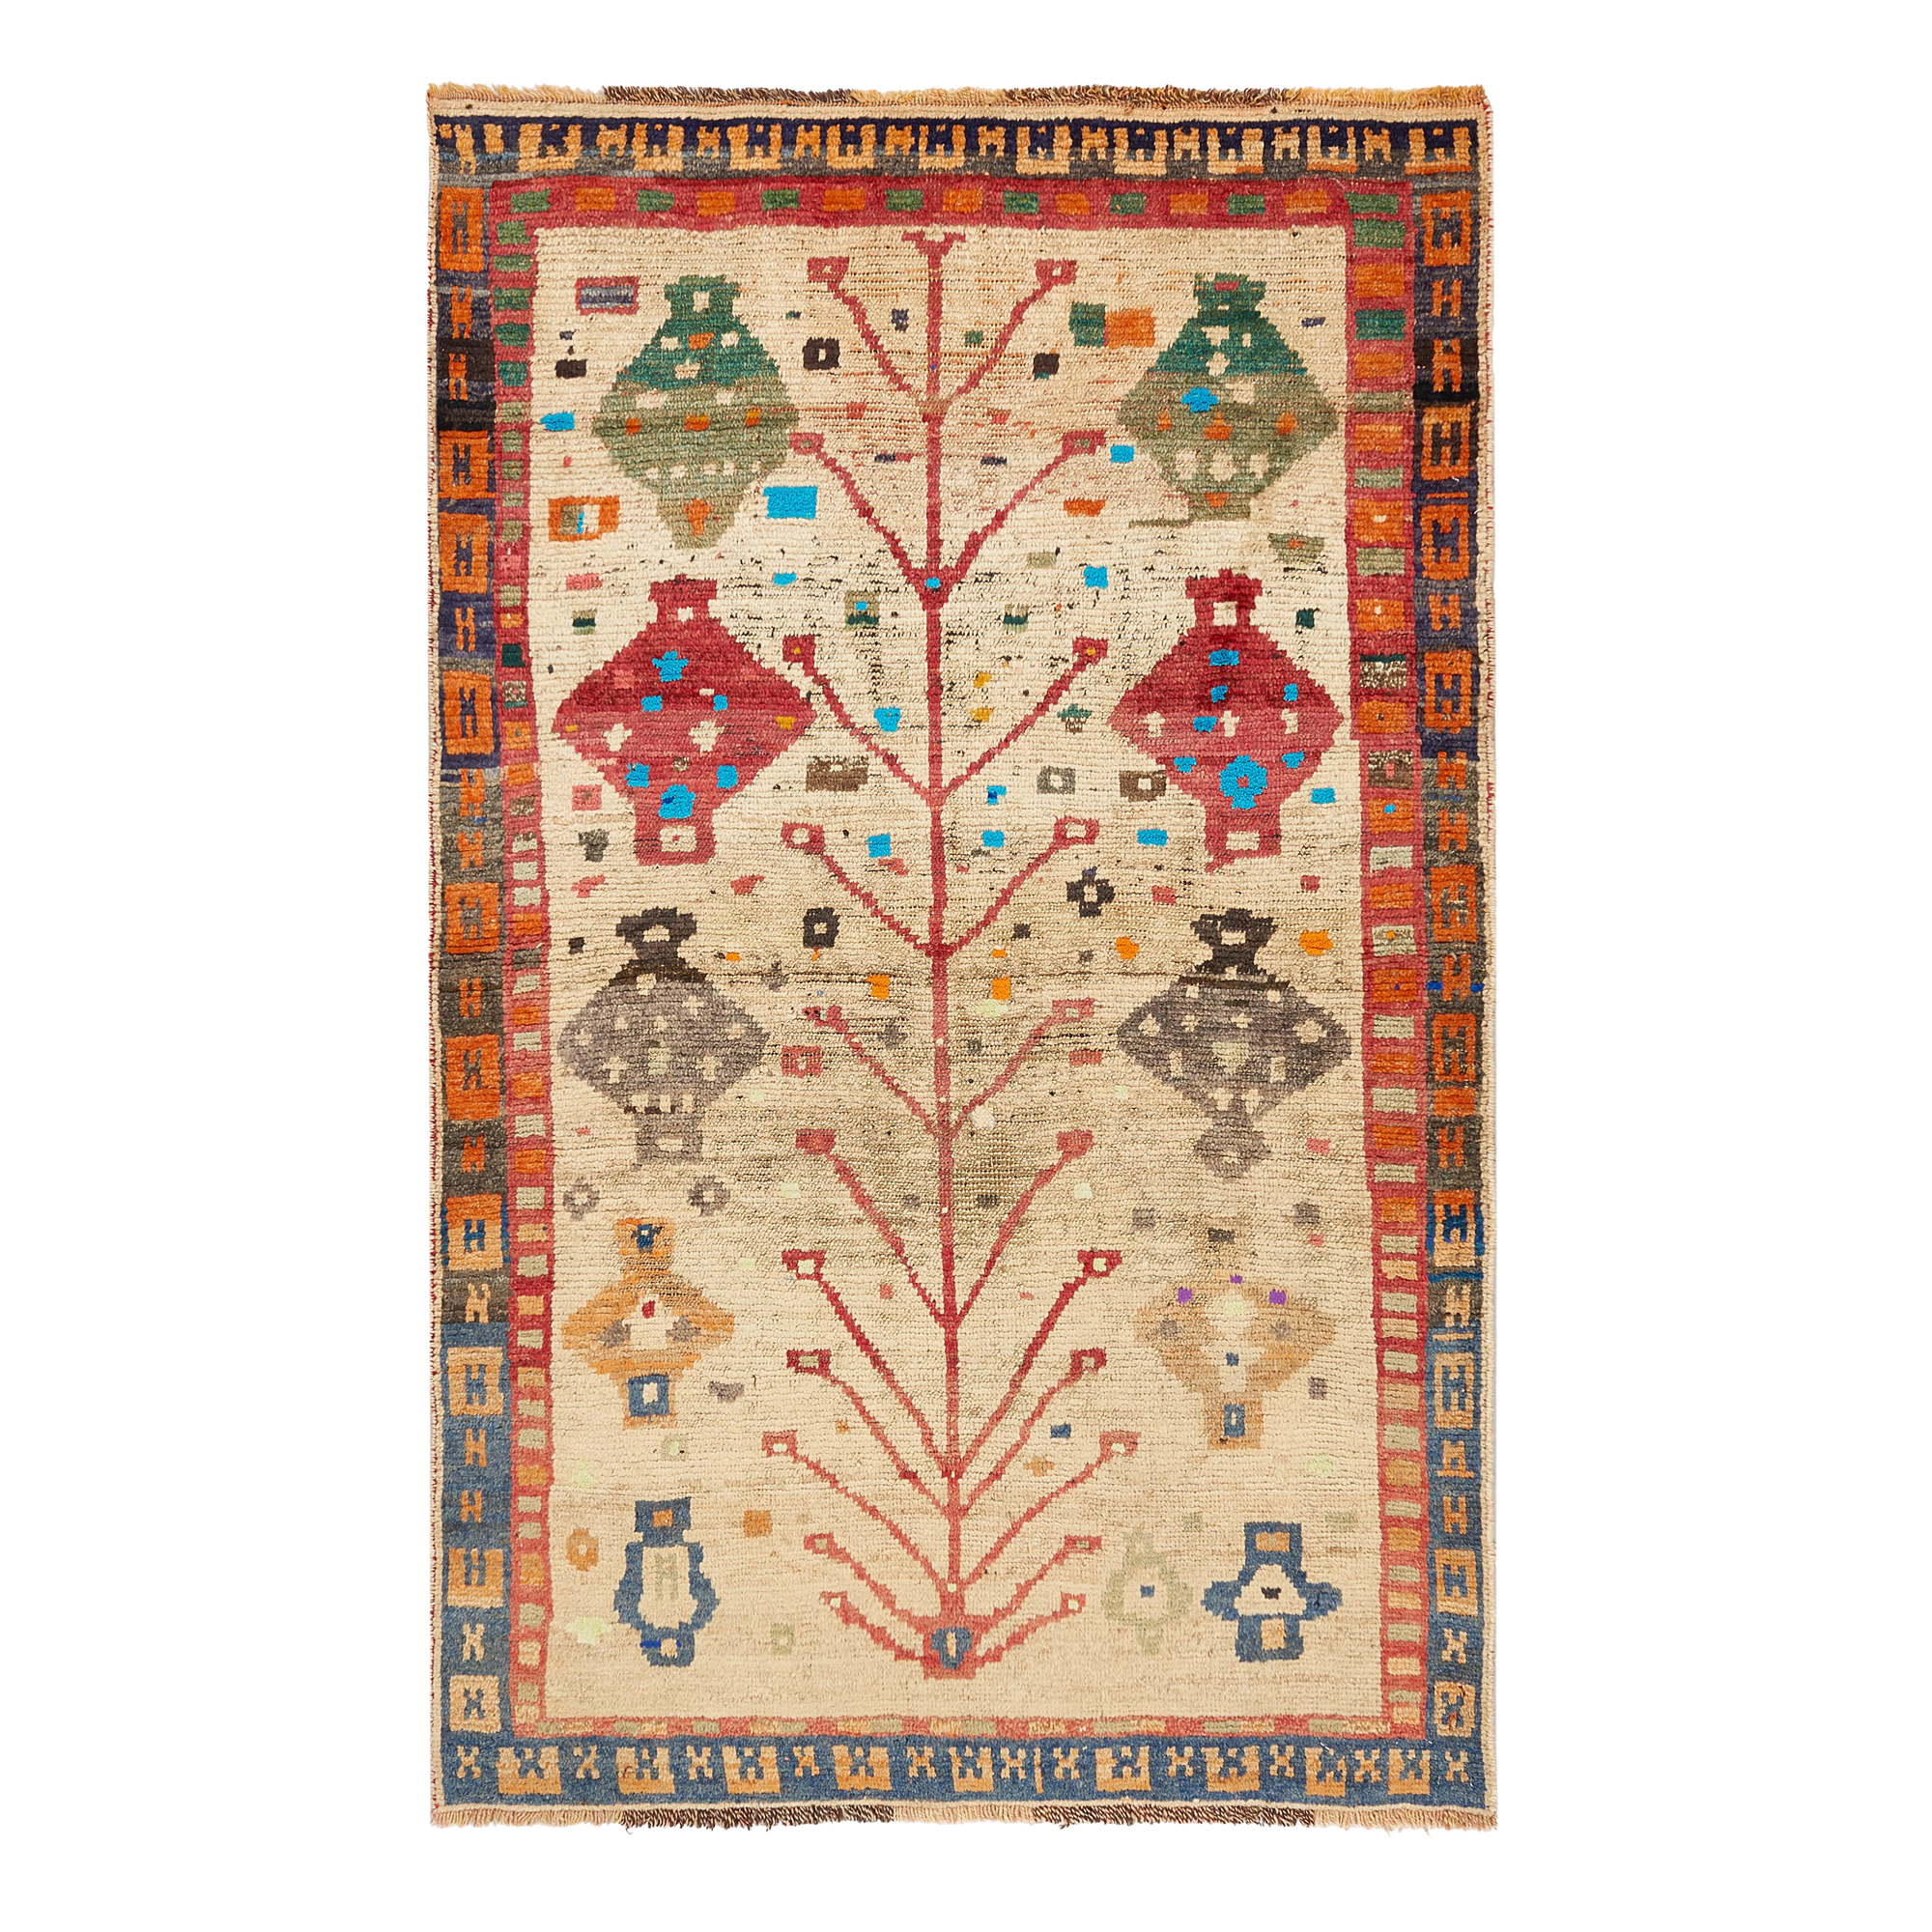 The Naziri Family Private Collection was built by Mohammad Naziri and his wife Lila over the span of five decades spent sourcing rugs from the remote corners of southern Persia.